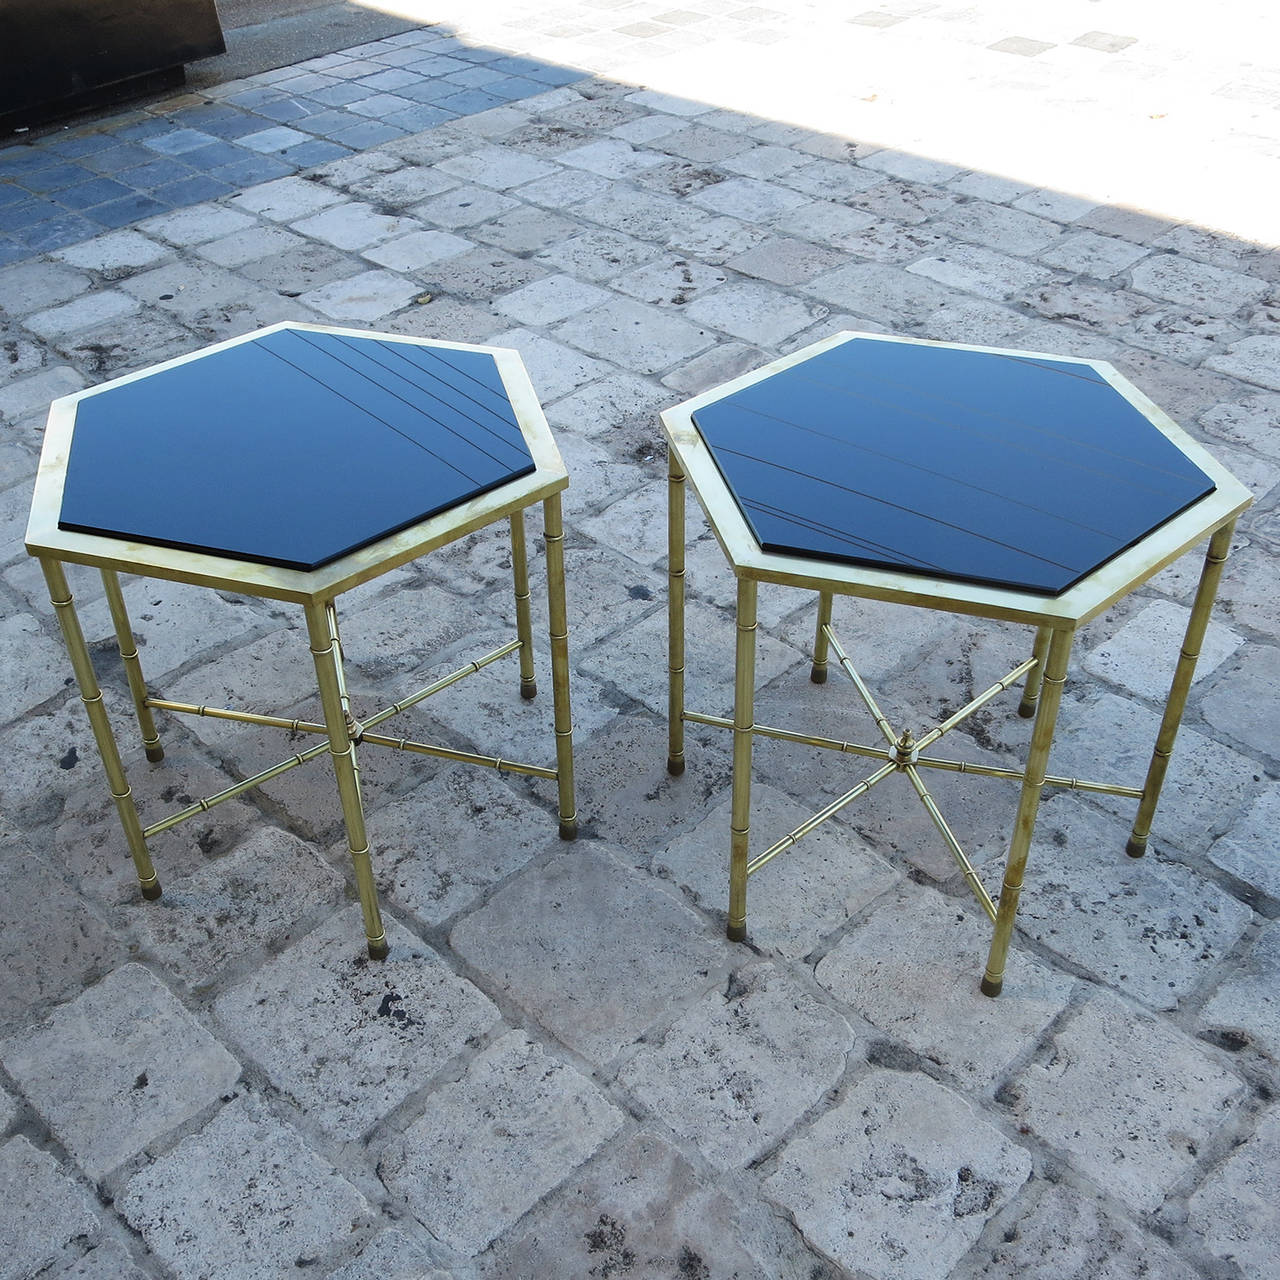 A Classic and versatile design, these handsome tables will be at home in a modern or more traditional setting. The legs and stretchers are created in a faux bamboo style, topped with a squared brass top. We have added new thick glass tops, finished